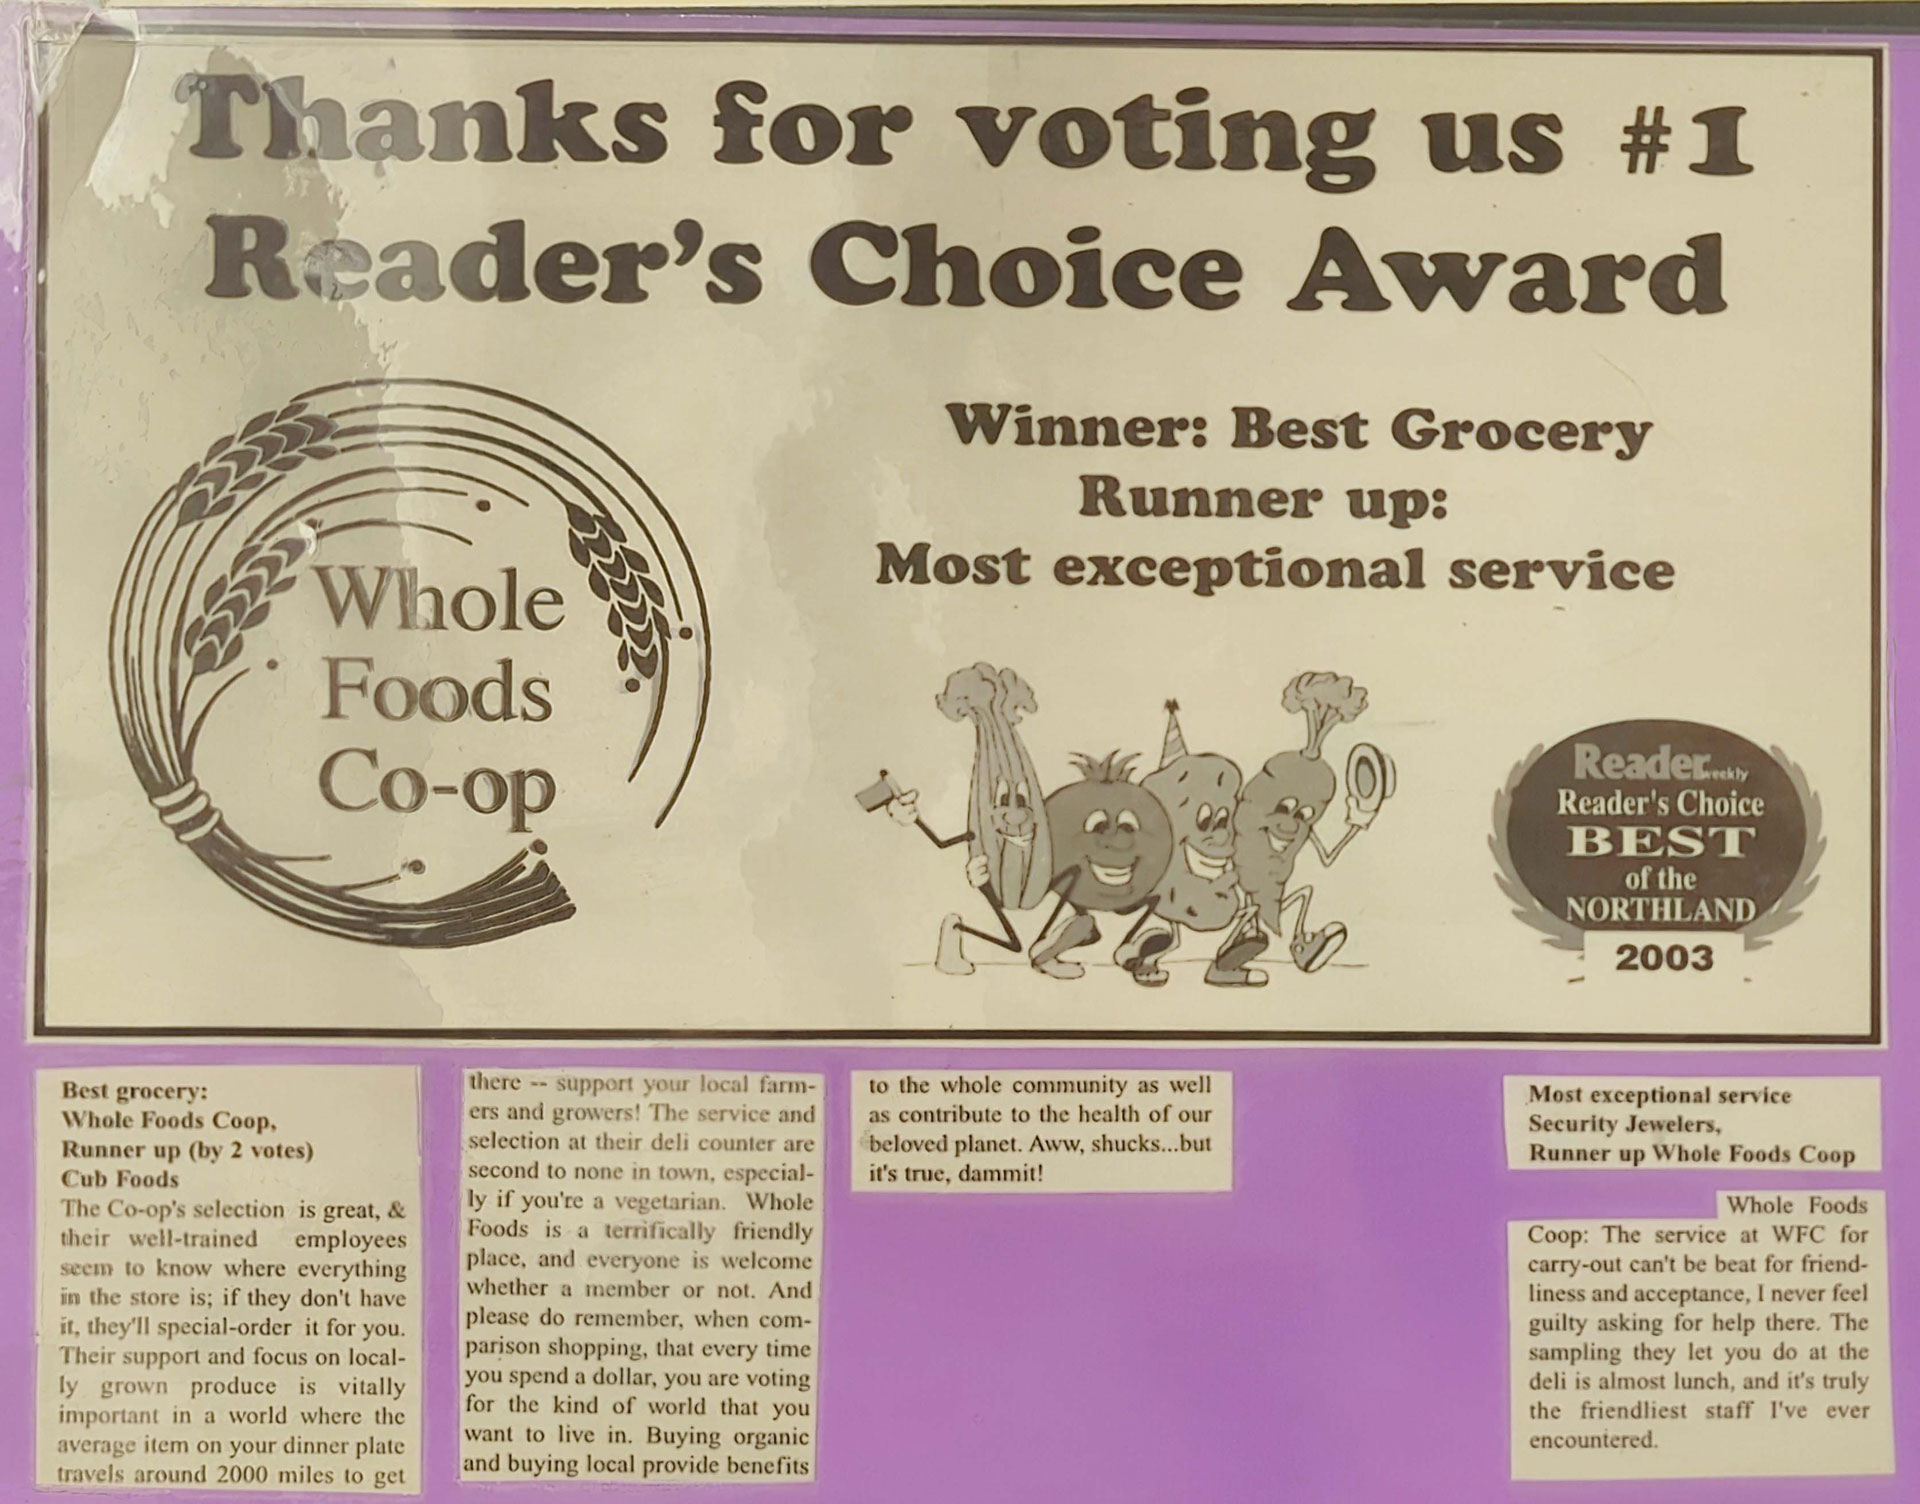 A sign titled "Thanks for voting us #1 Reader's Choice Award," reads "Winner: Best Grocery, Runner up: Most exceptional service," from 2003. Featuring an illustration of anthropomorphic vegetables and the Whole Foods Co-op logo, it highlights the outstanding services at Whole Foods Co-op Duluth MN.